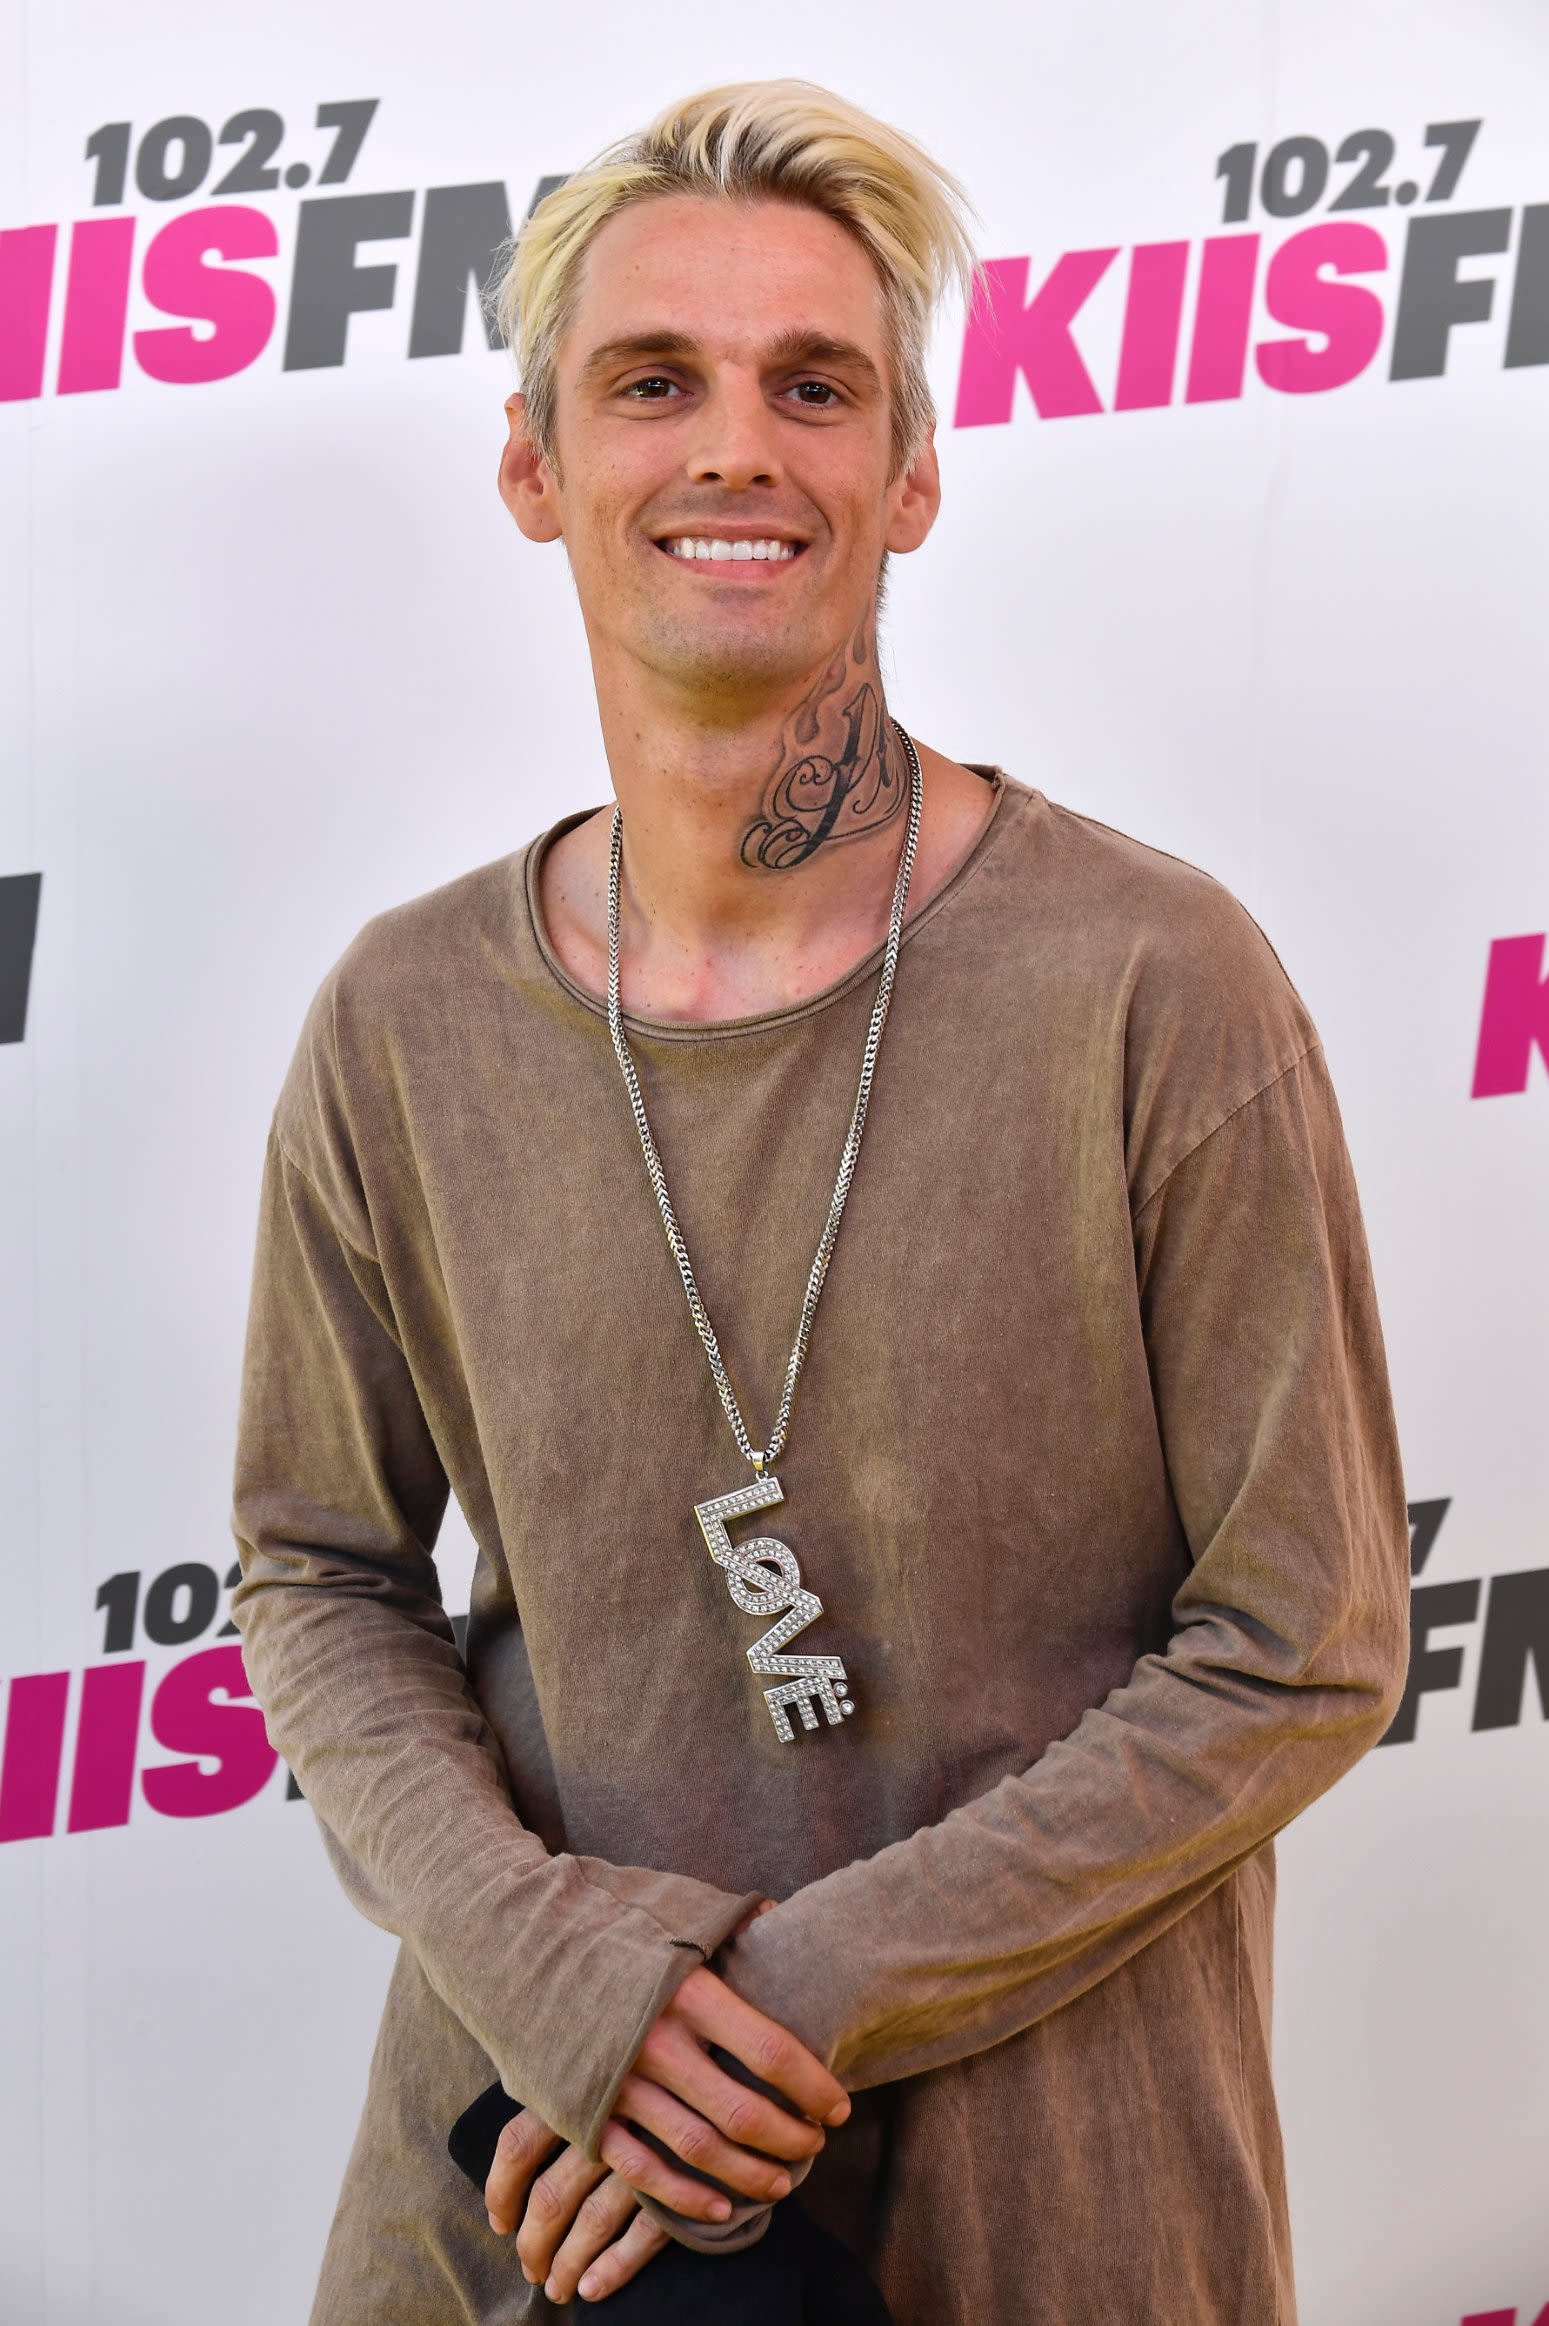 Bf Xxxxx Hd Girls - Aaron Carter comes out as bisexual | CNN